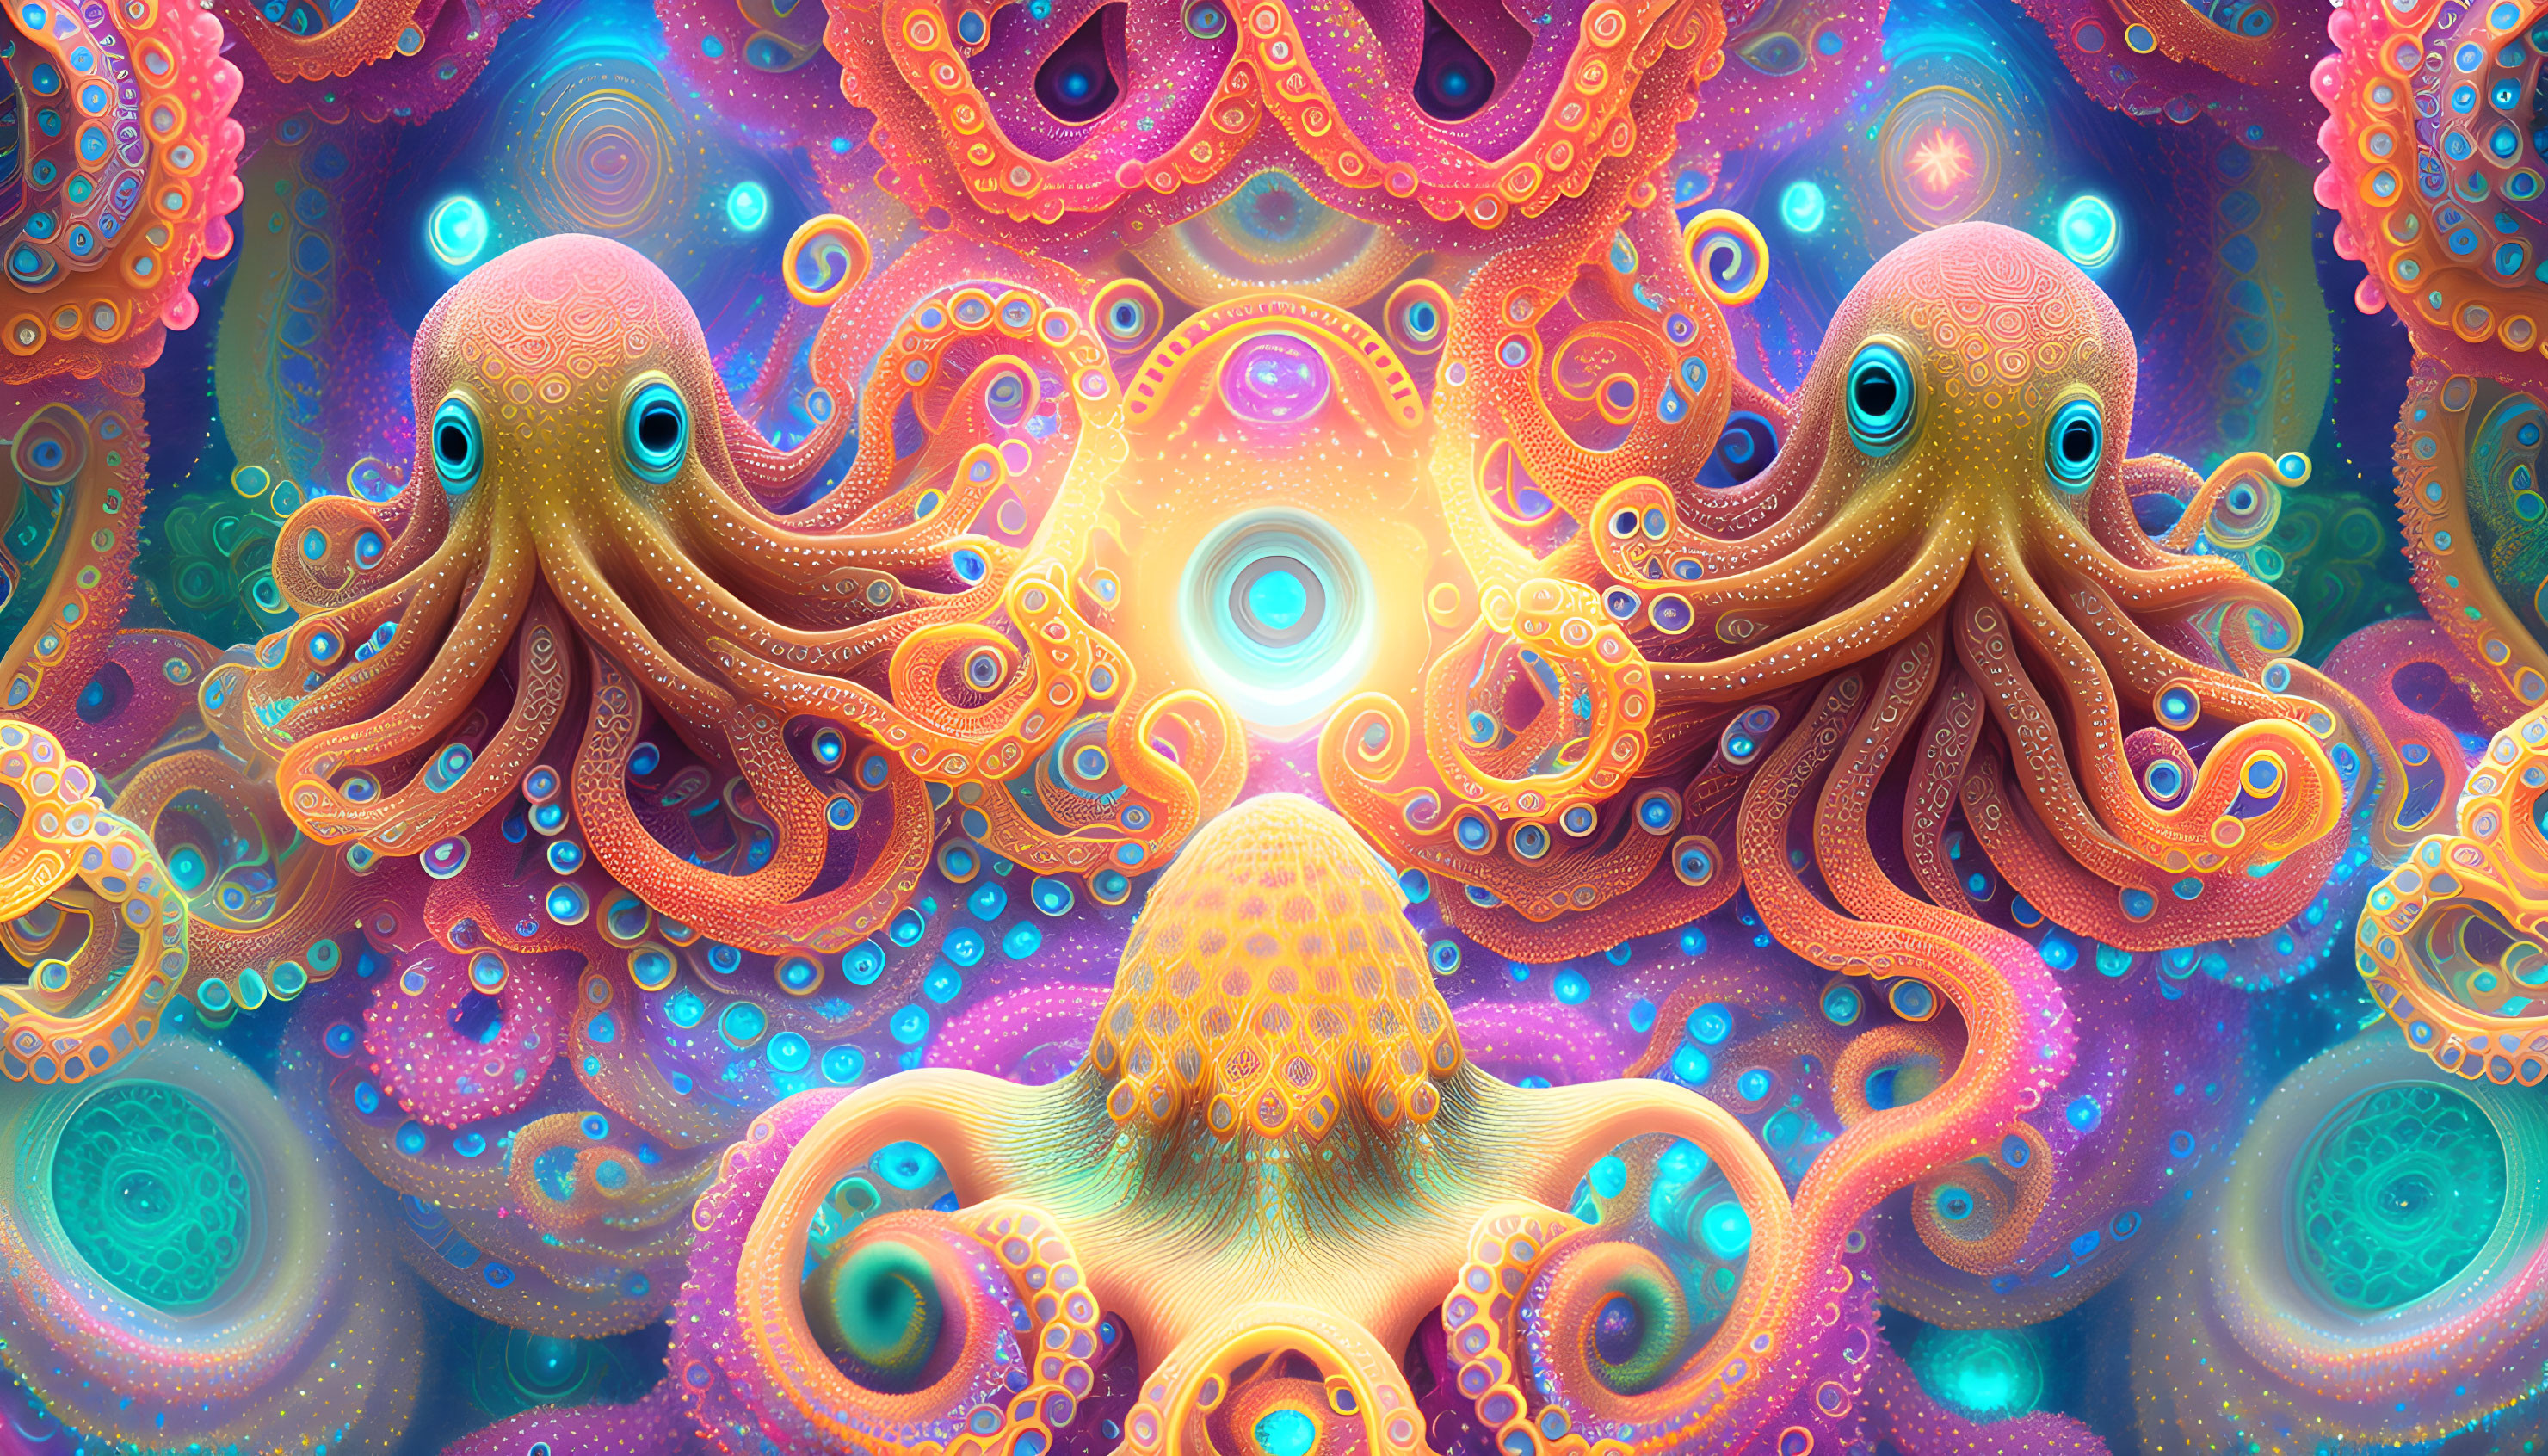 Colorful digital artwork: Two stylized octopuses in intricate patterns amid psychedelic swirls.